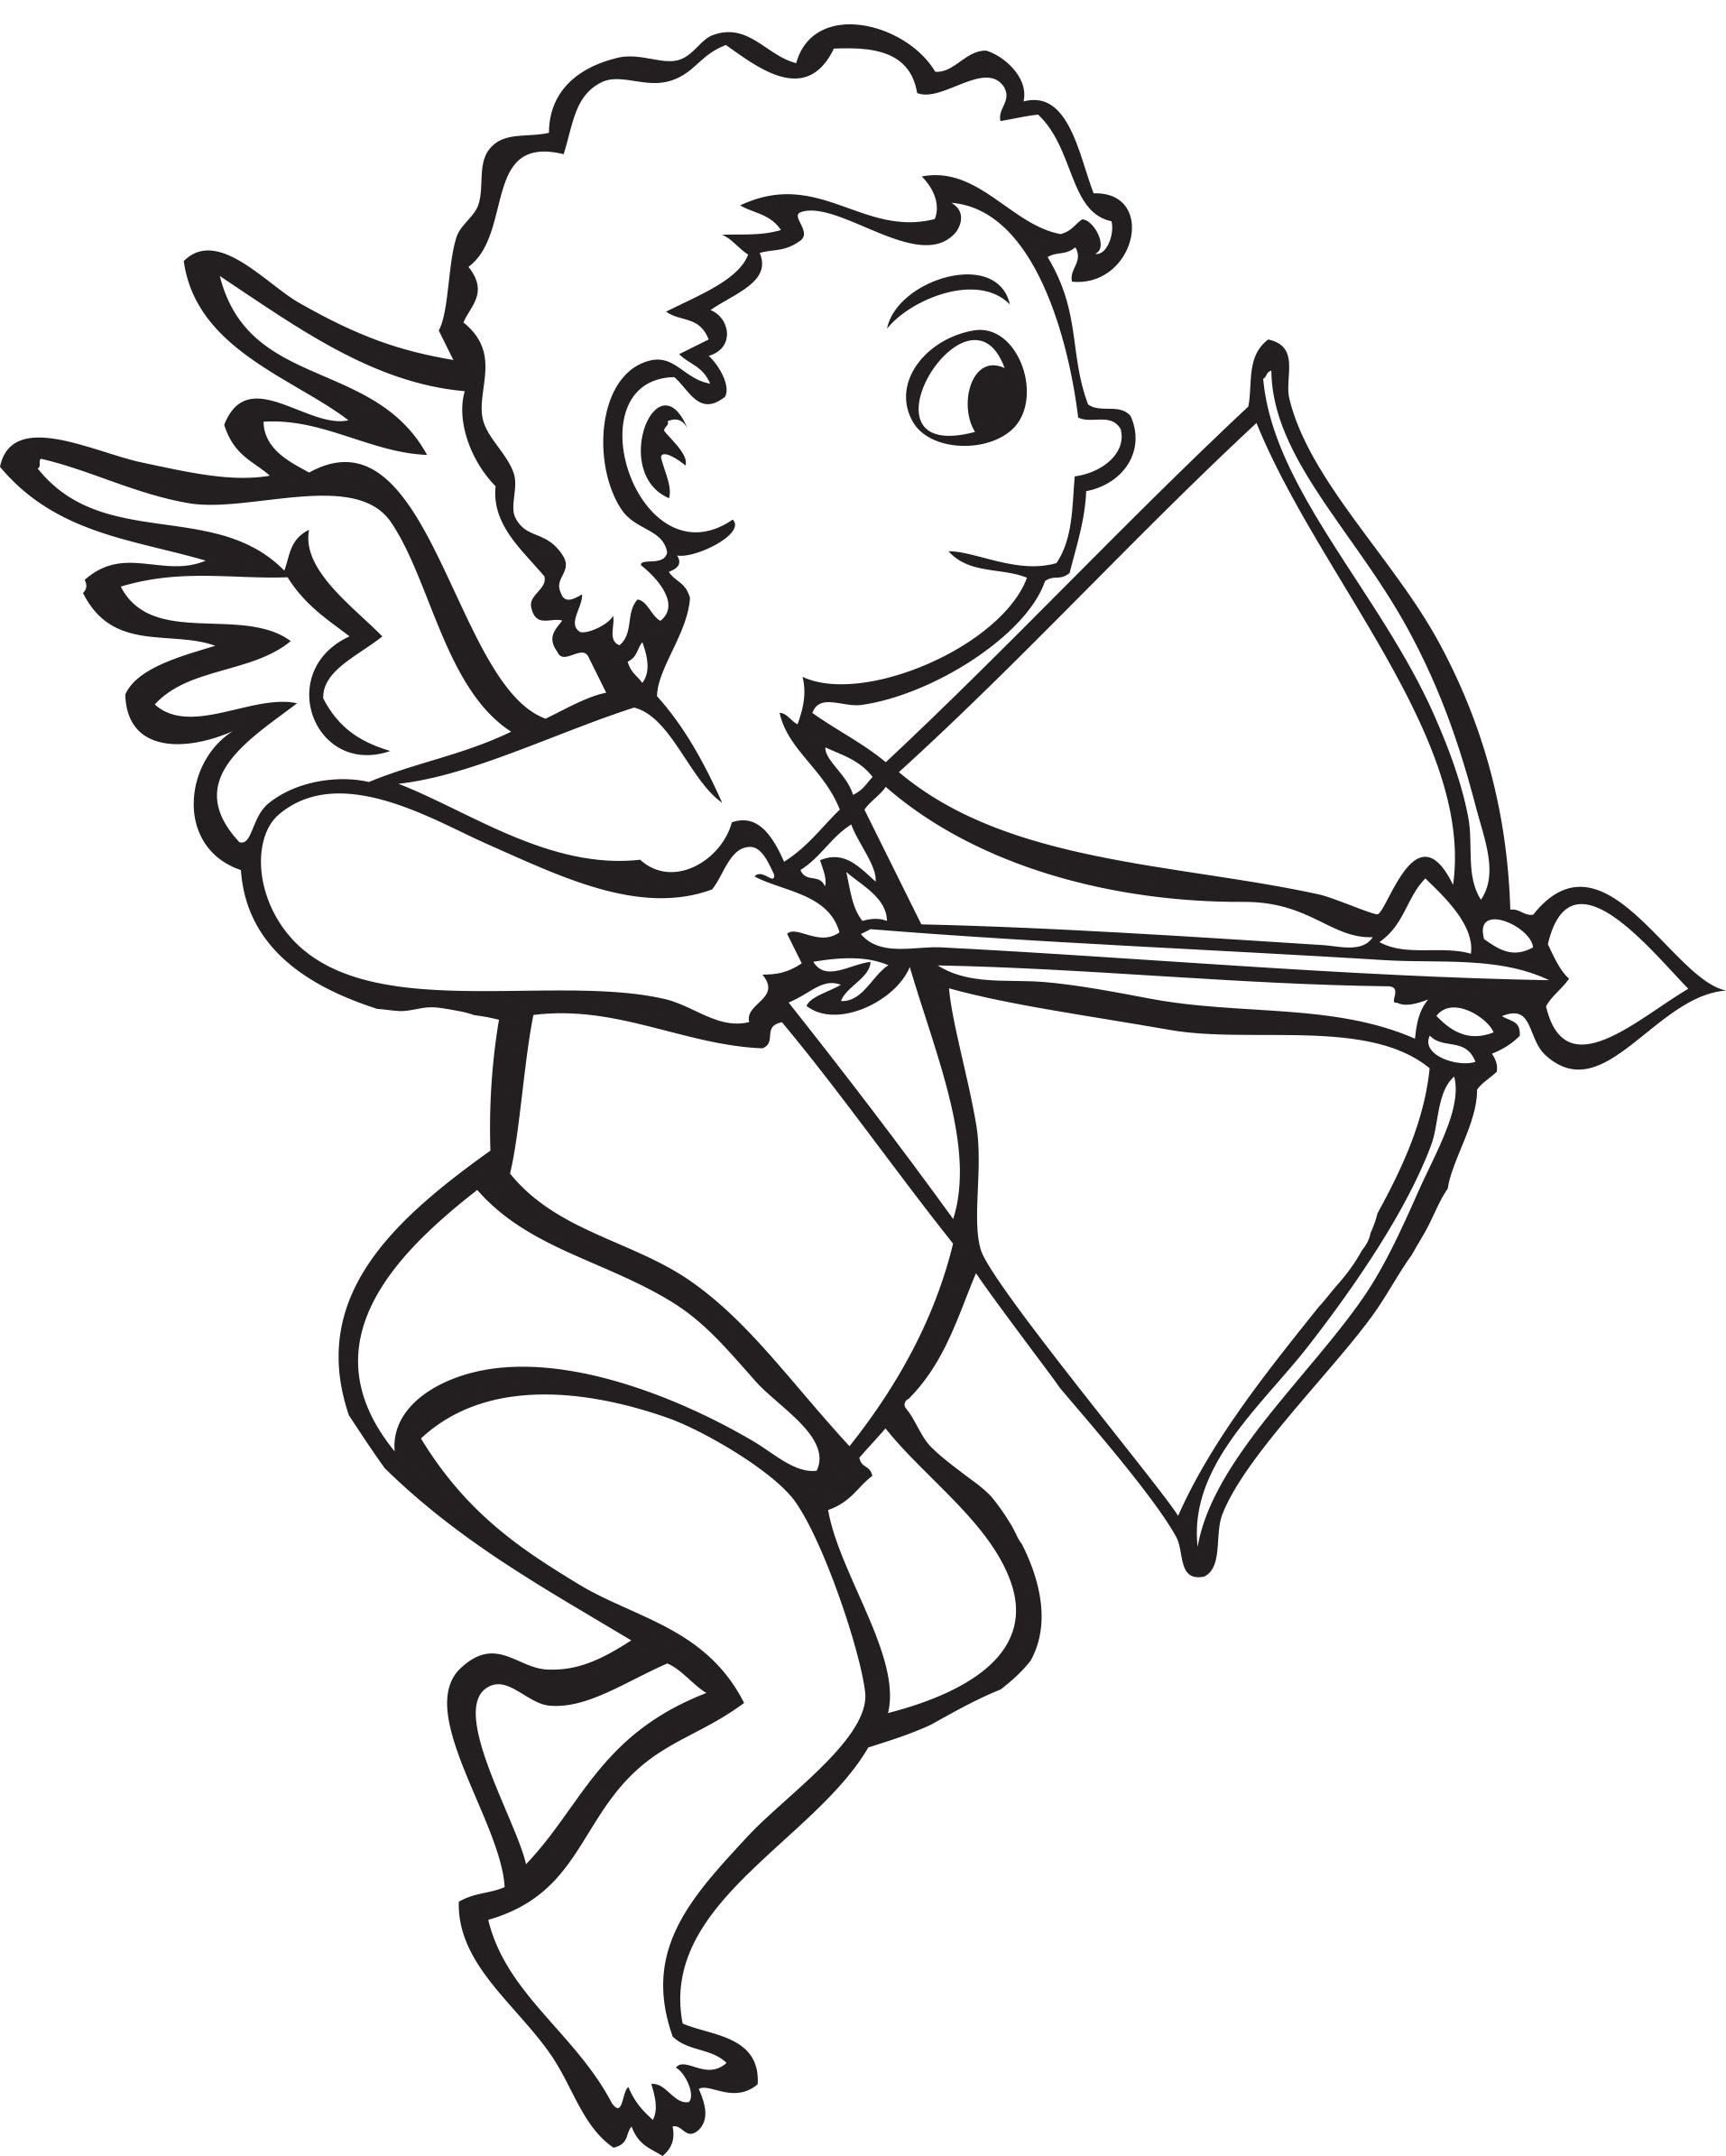 Image of Cupid Clipart Black and White #9137, Cupid Outline cupid ...